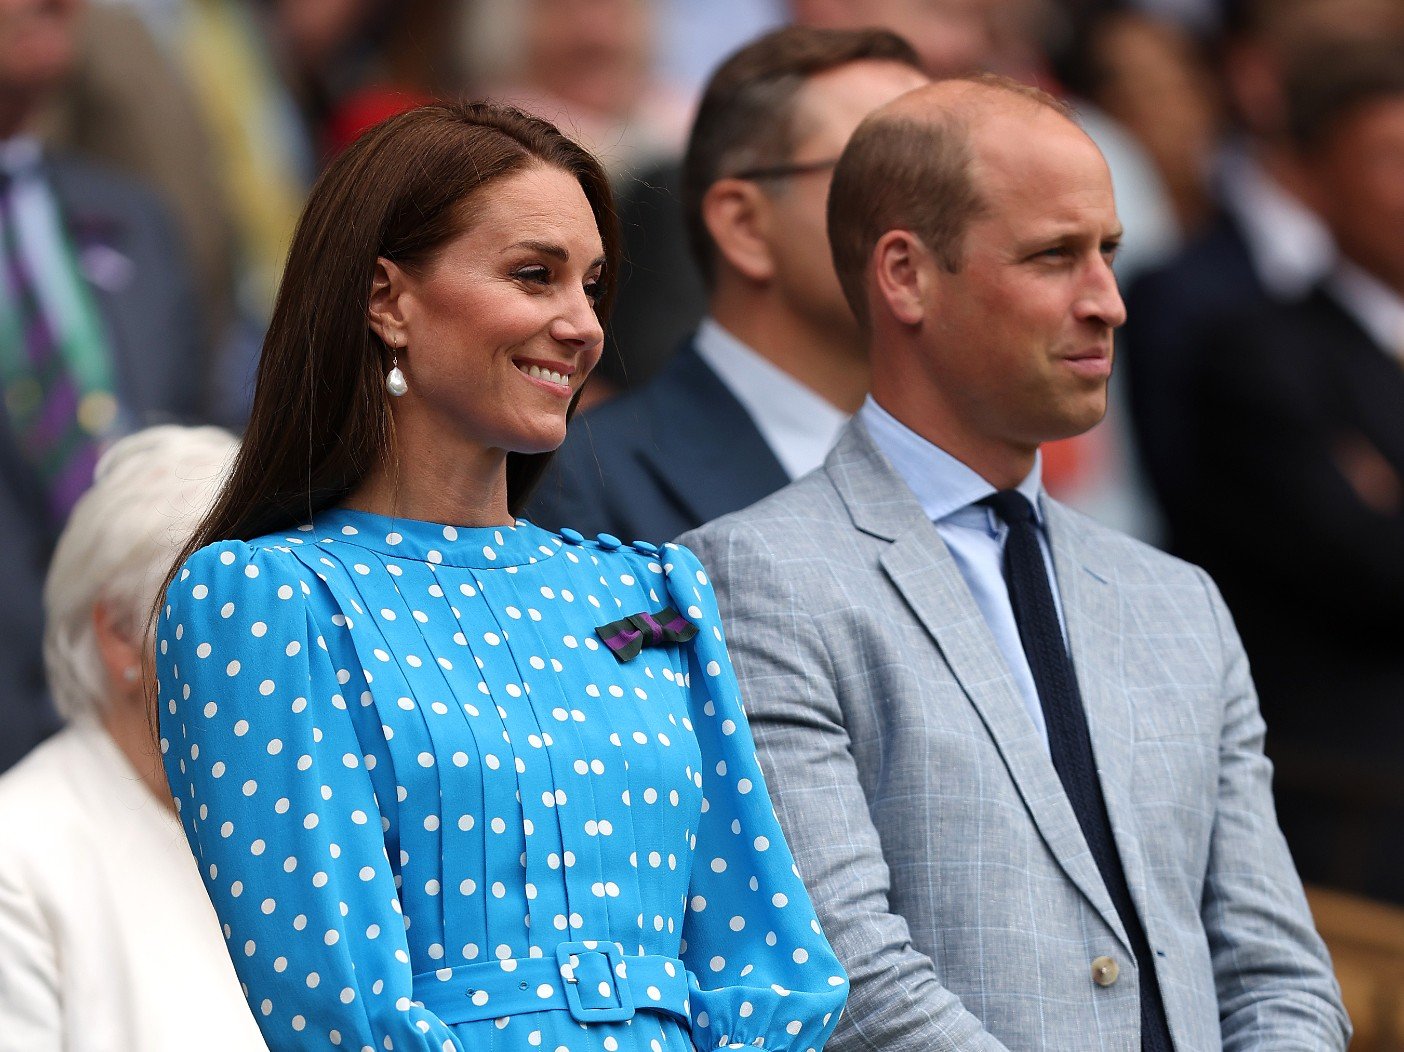 Prince William and Kate Middleton Break the Royal Protocol Once More This Summer